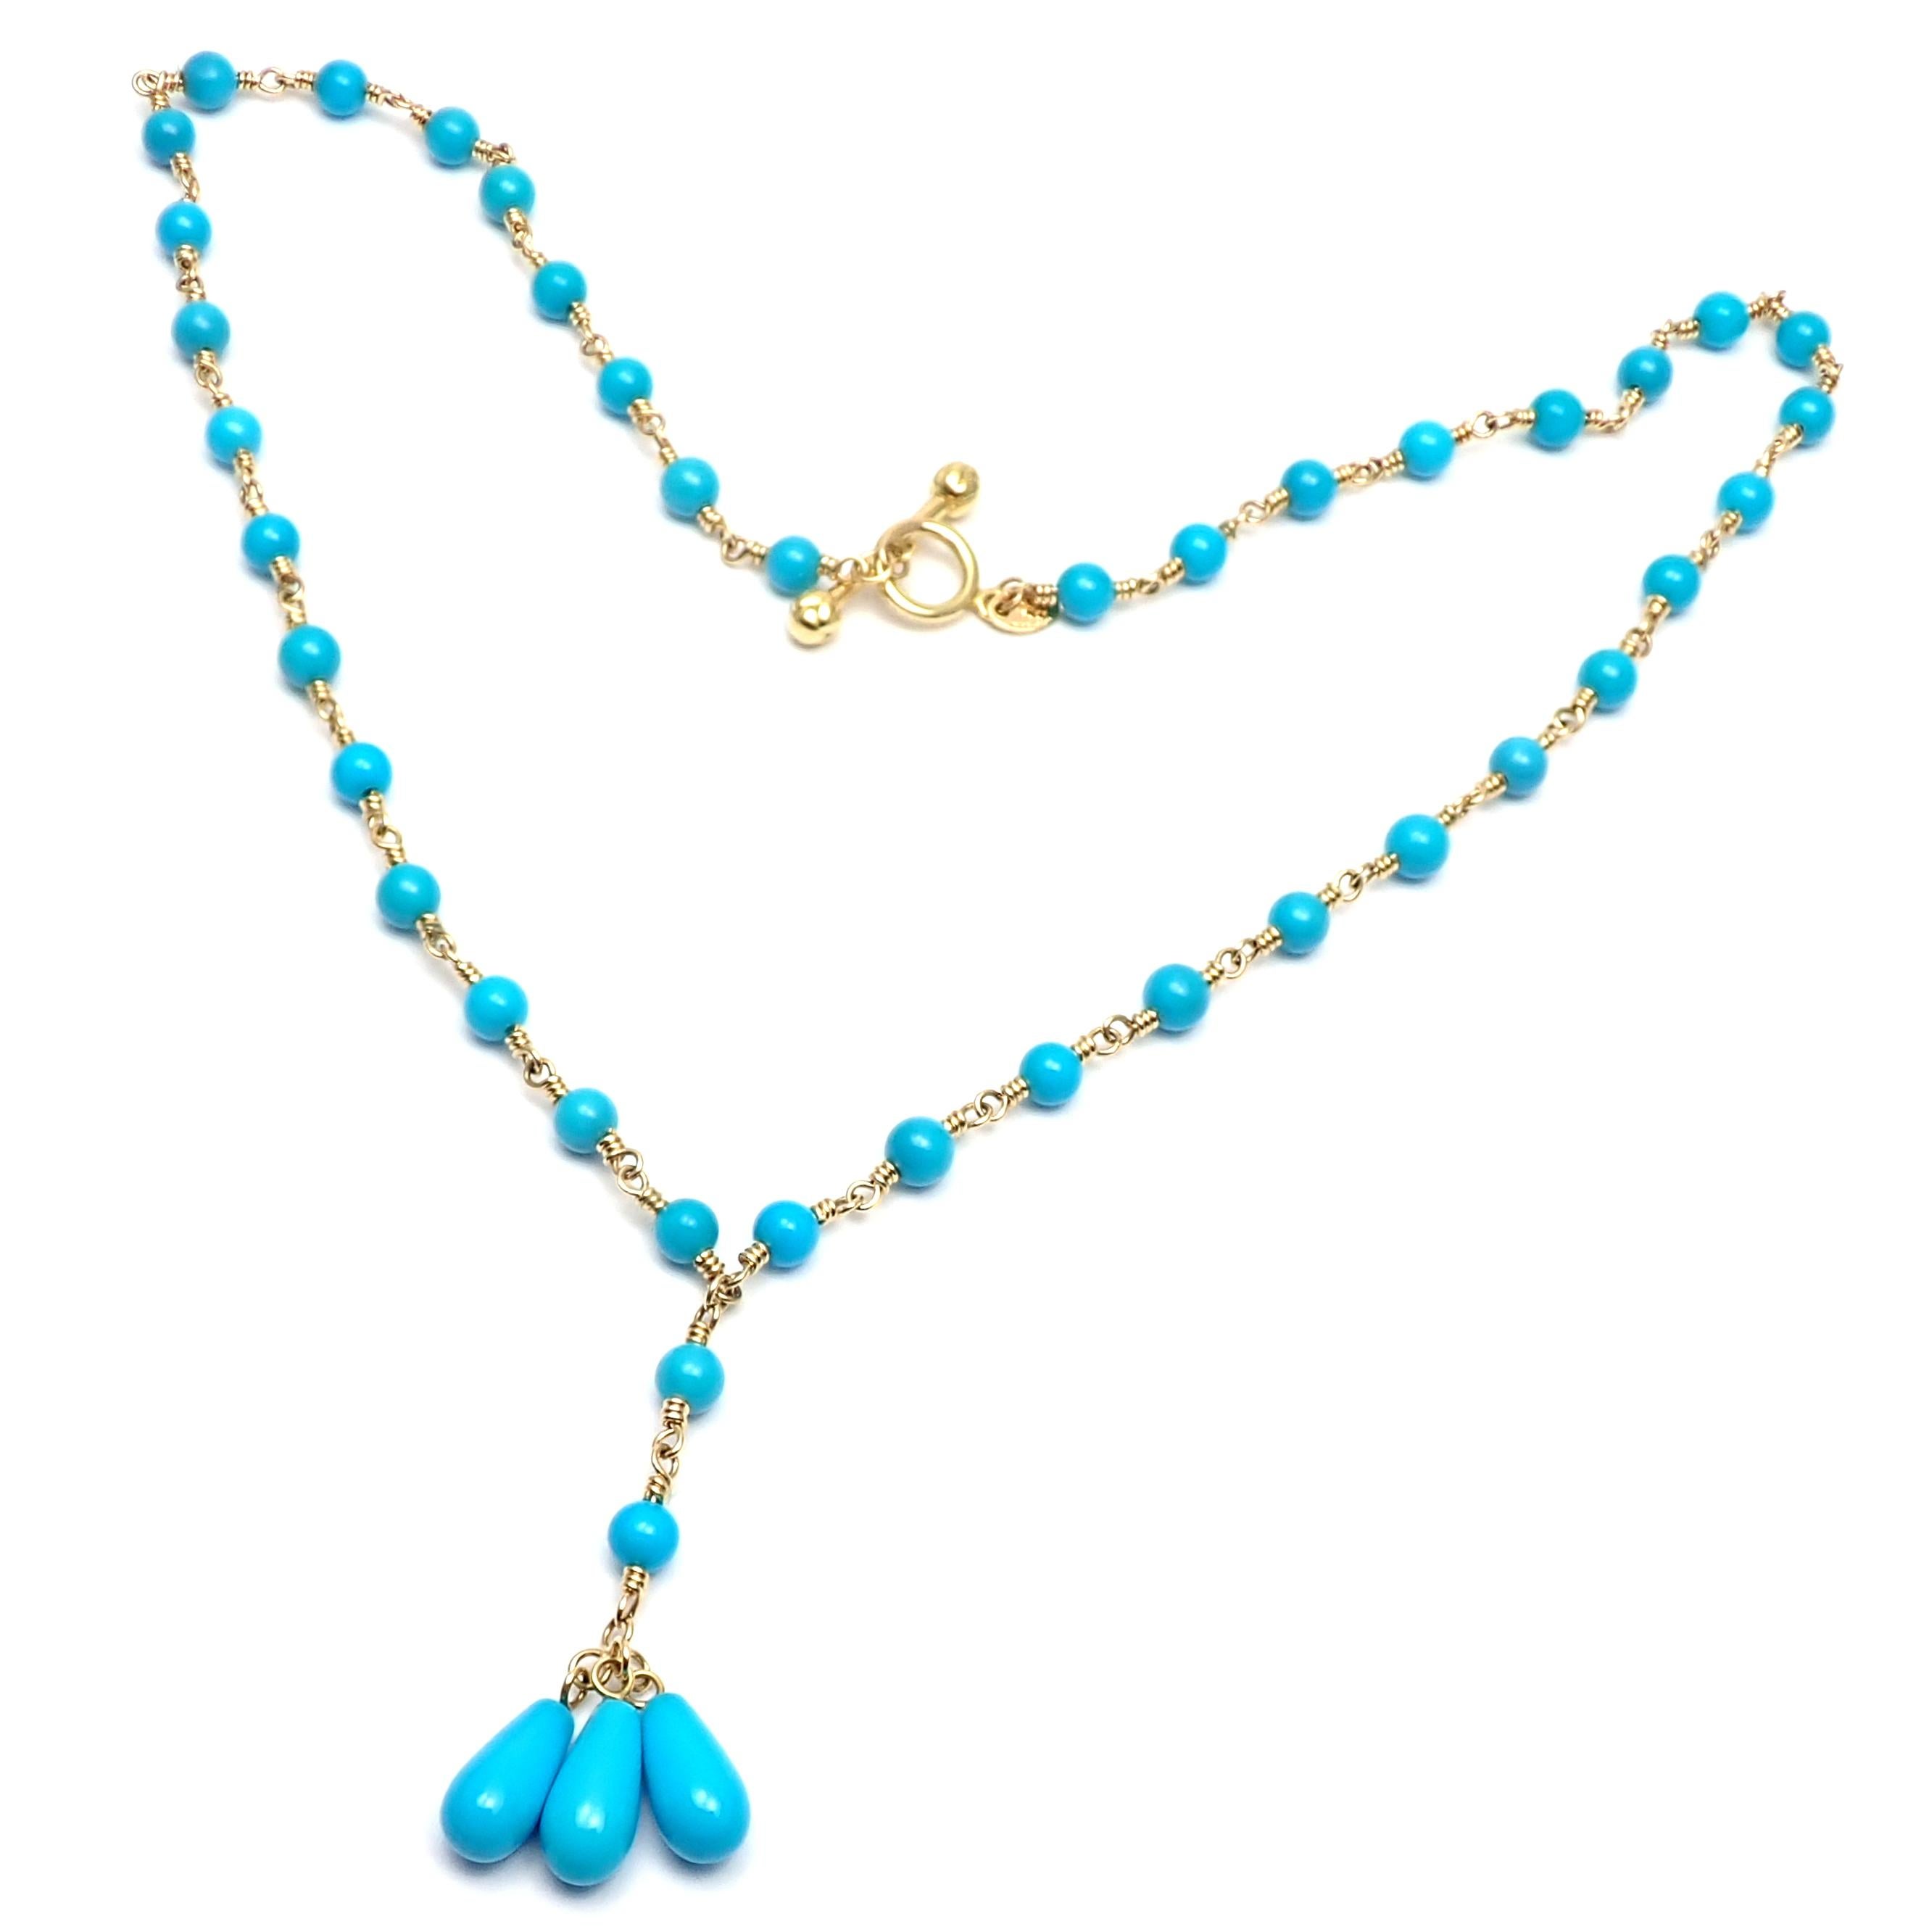 18k Yellow Gold Turquoise Bead Necklace by Tiffany & Co. 
With 43 turquoise beads 4mm each.
Details: 
Necklace Length: 16